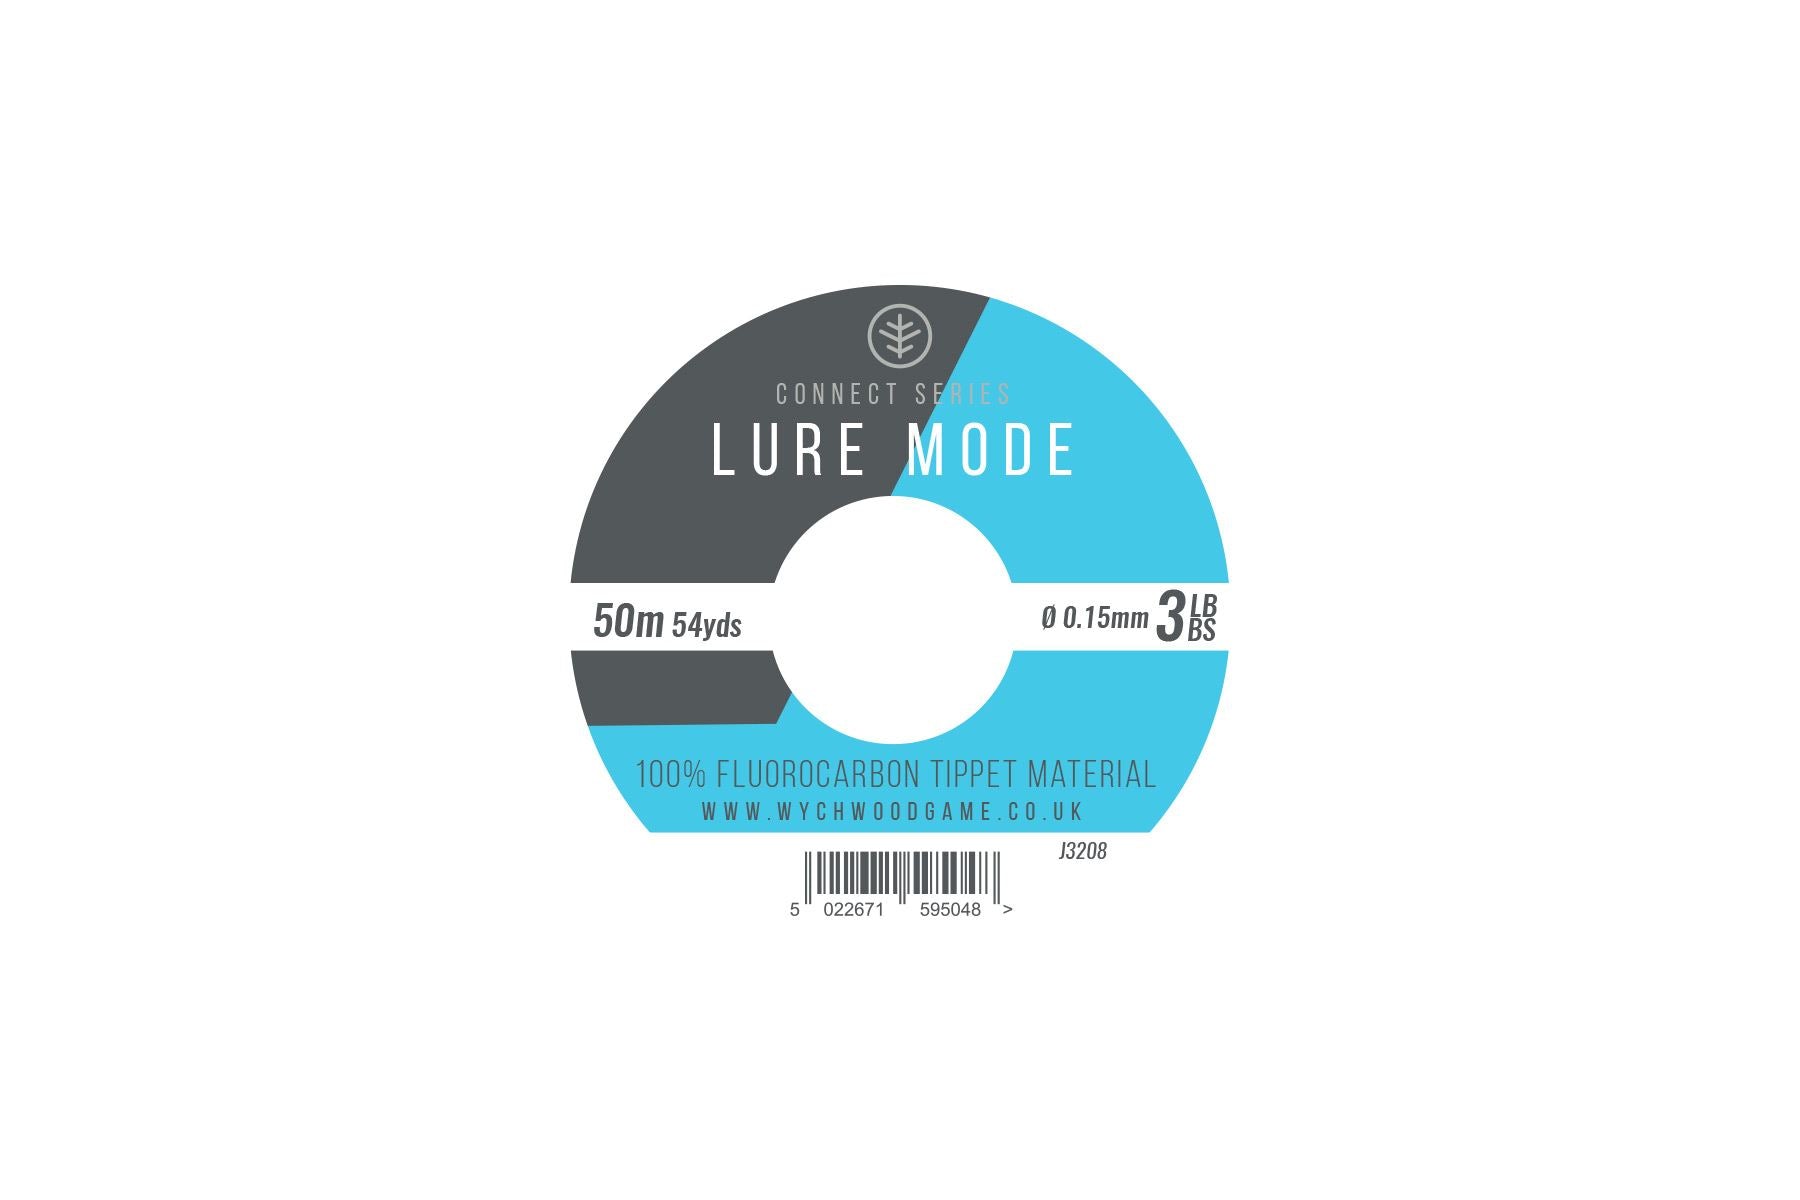 Wychwood Lure Mode Fluorocarbon 50m Tippet 3lb